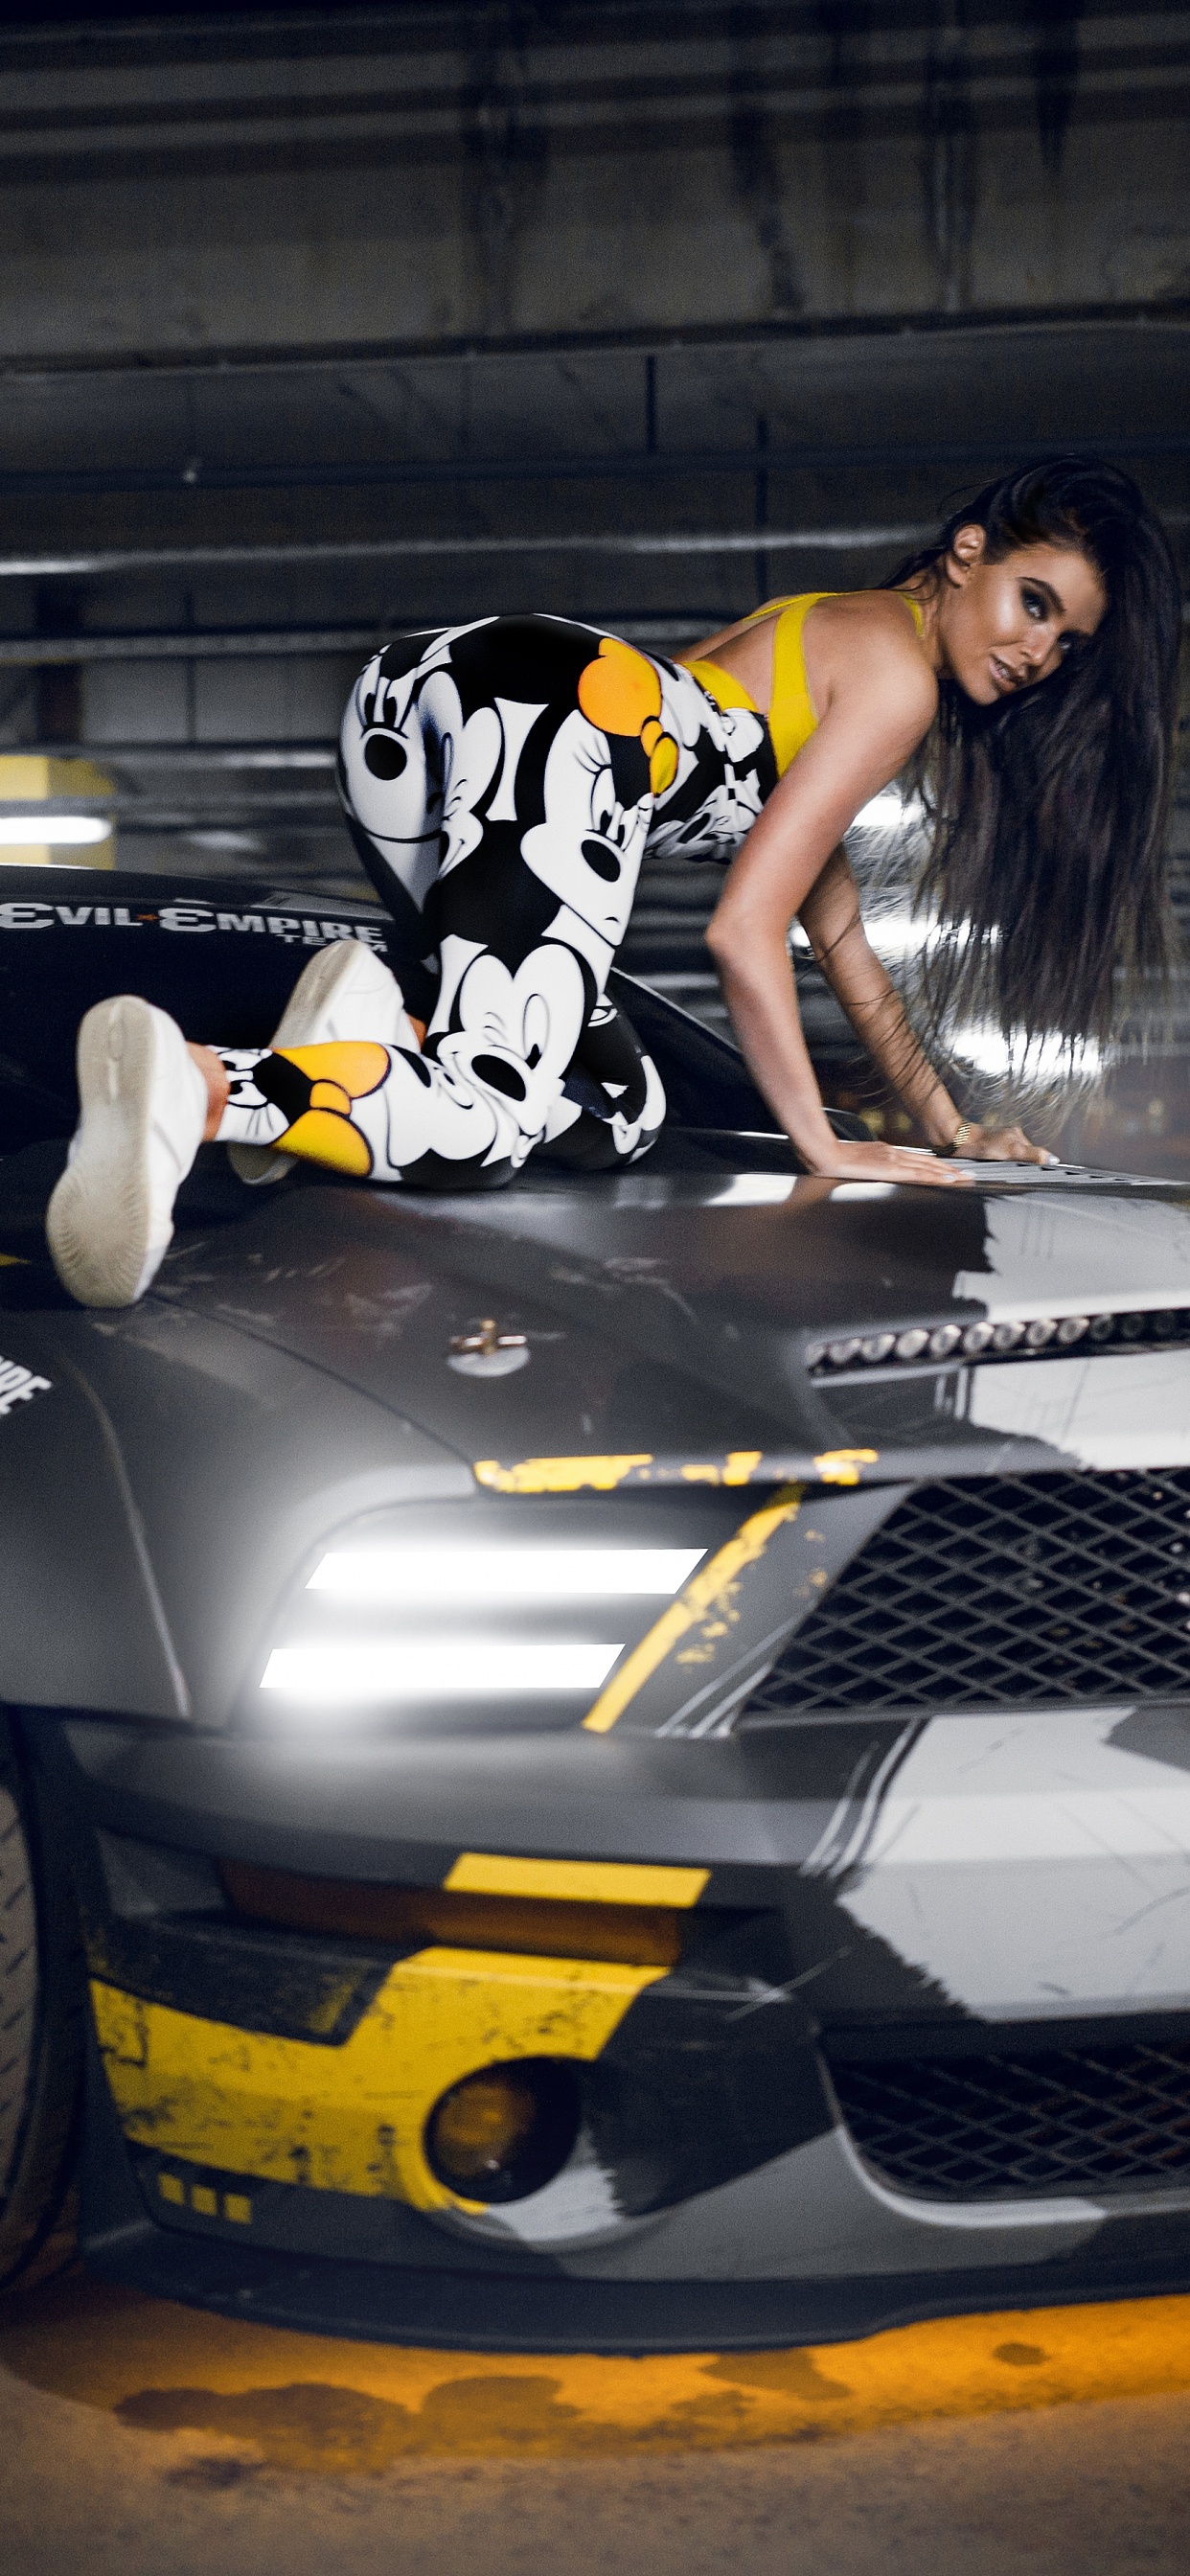 Woman in Black and White Floral Dress Riding on Black and Yellow Sports Car. Wallpaper in 1242x2688 Resolution